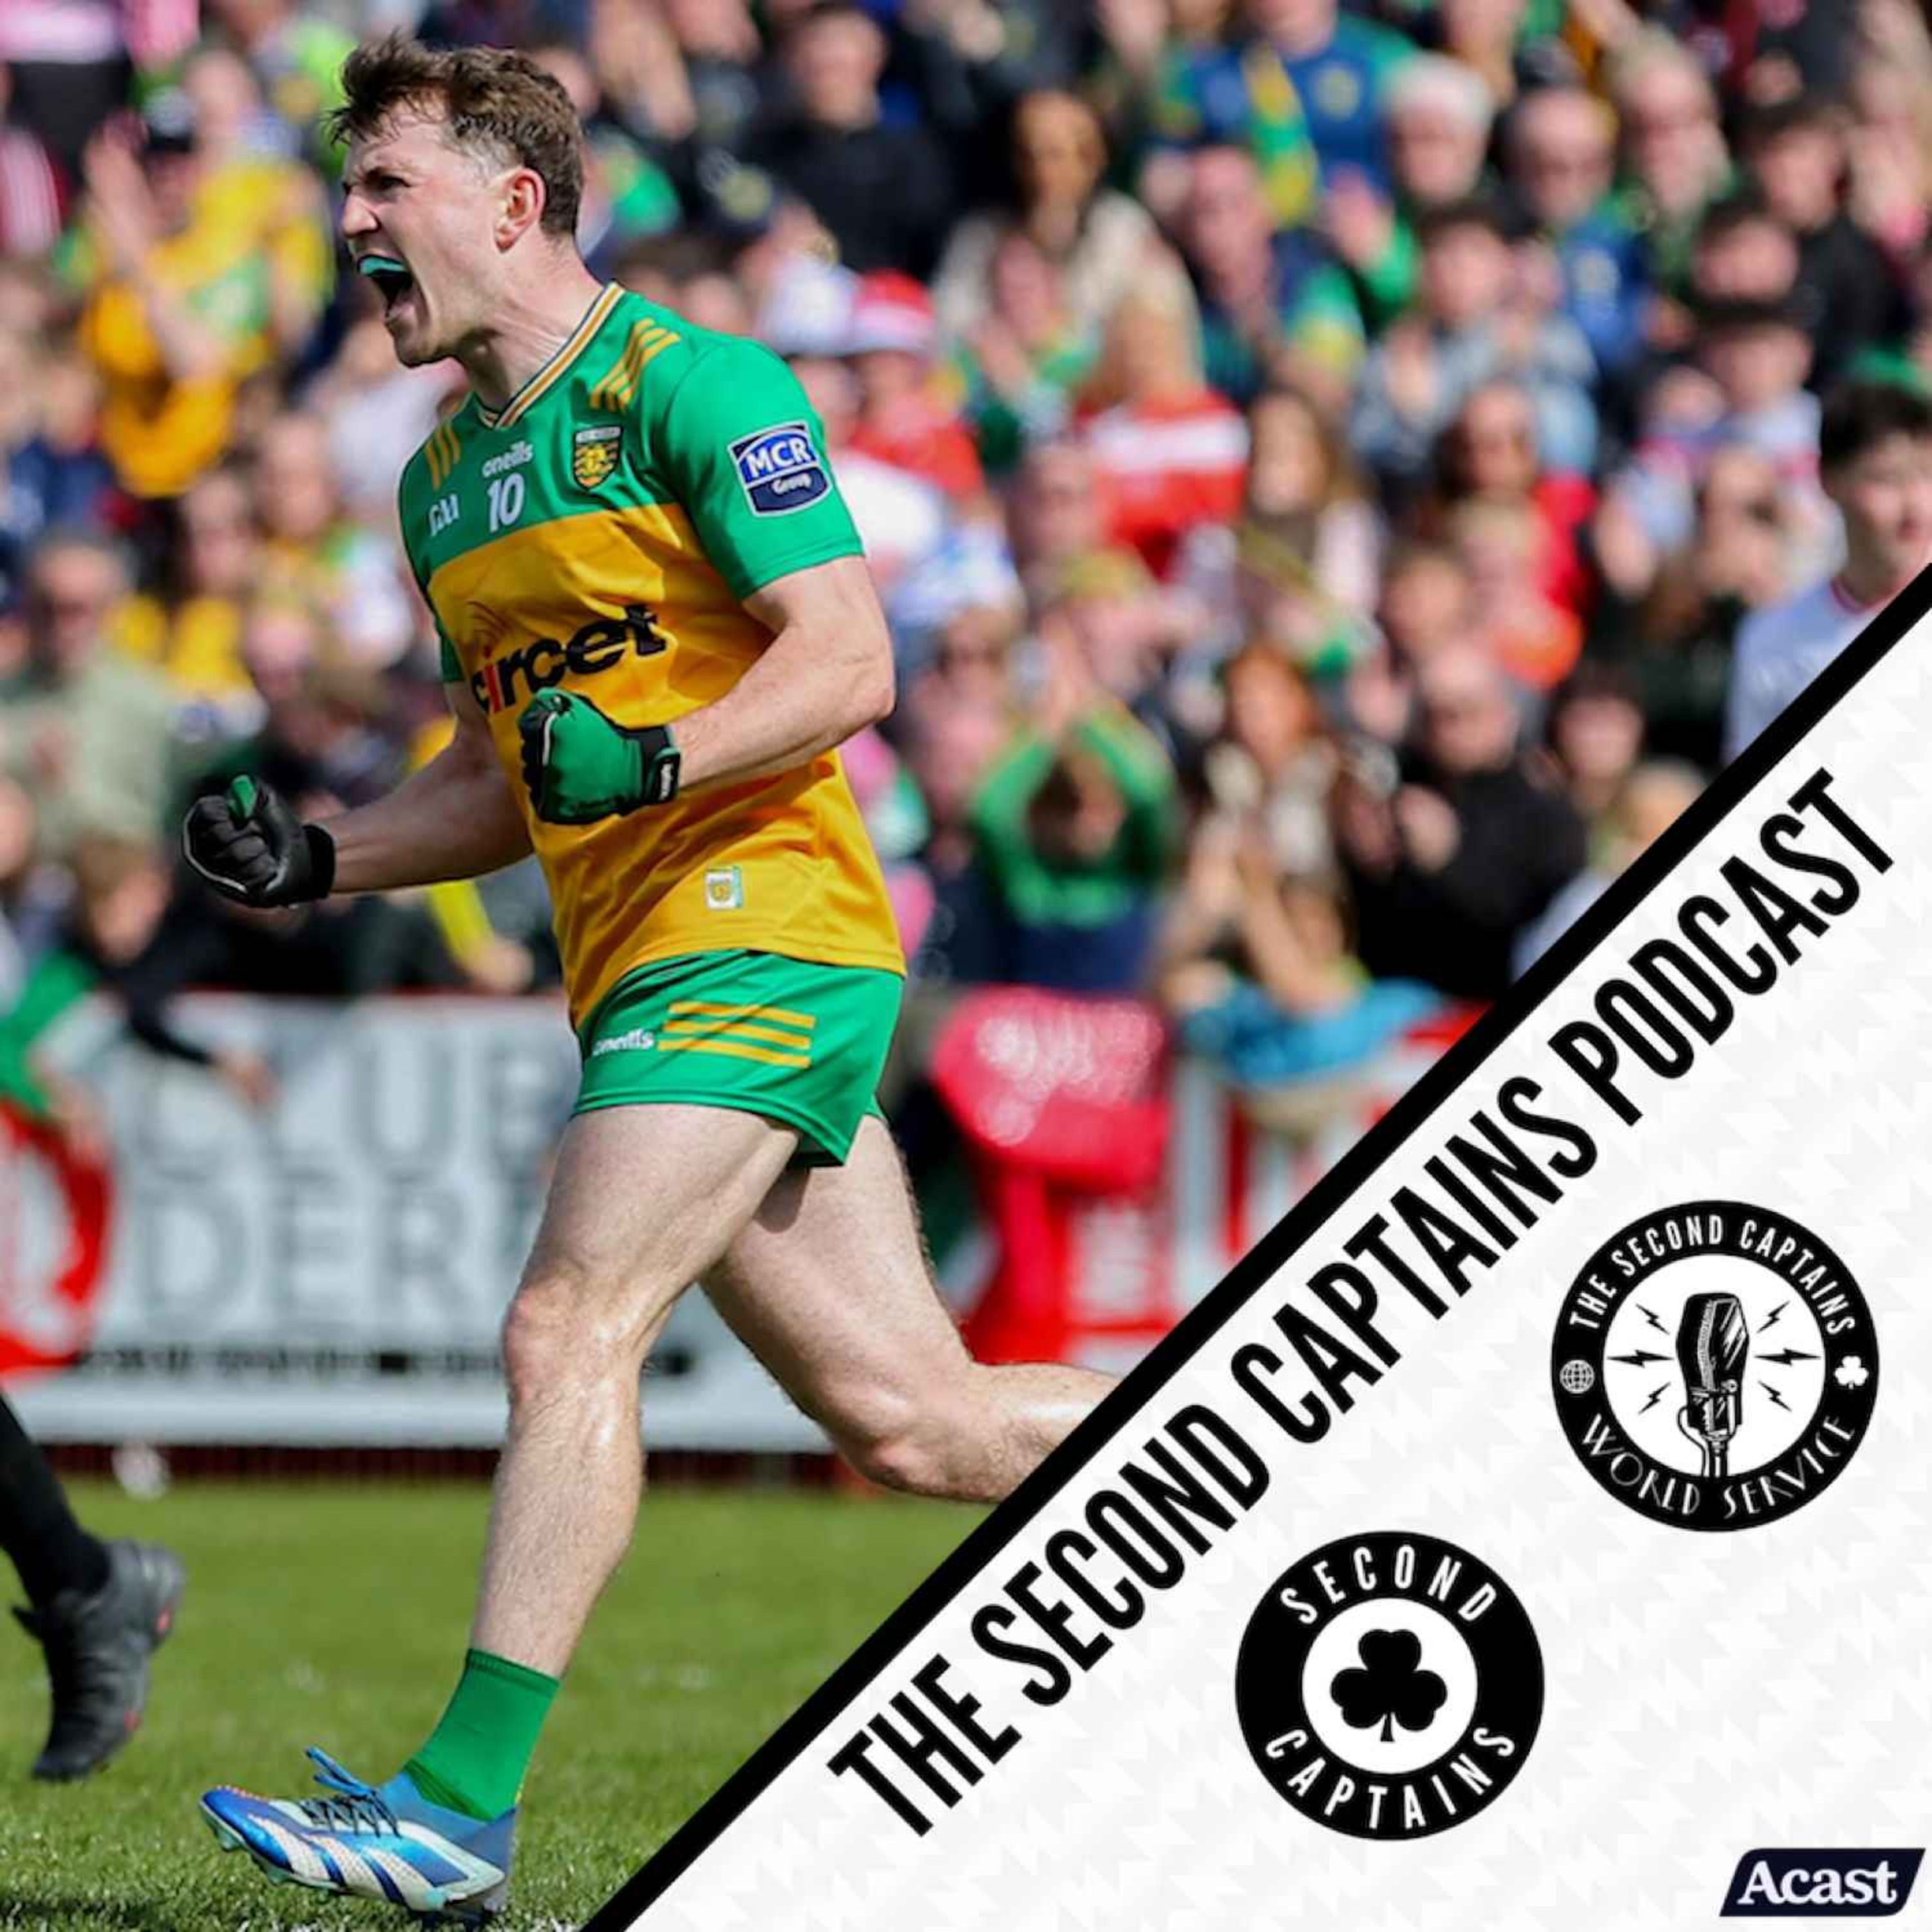 Ep 2928: Football Provincials Take Shape, Dogged Donegal, Rory's Journey - 29/04/24